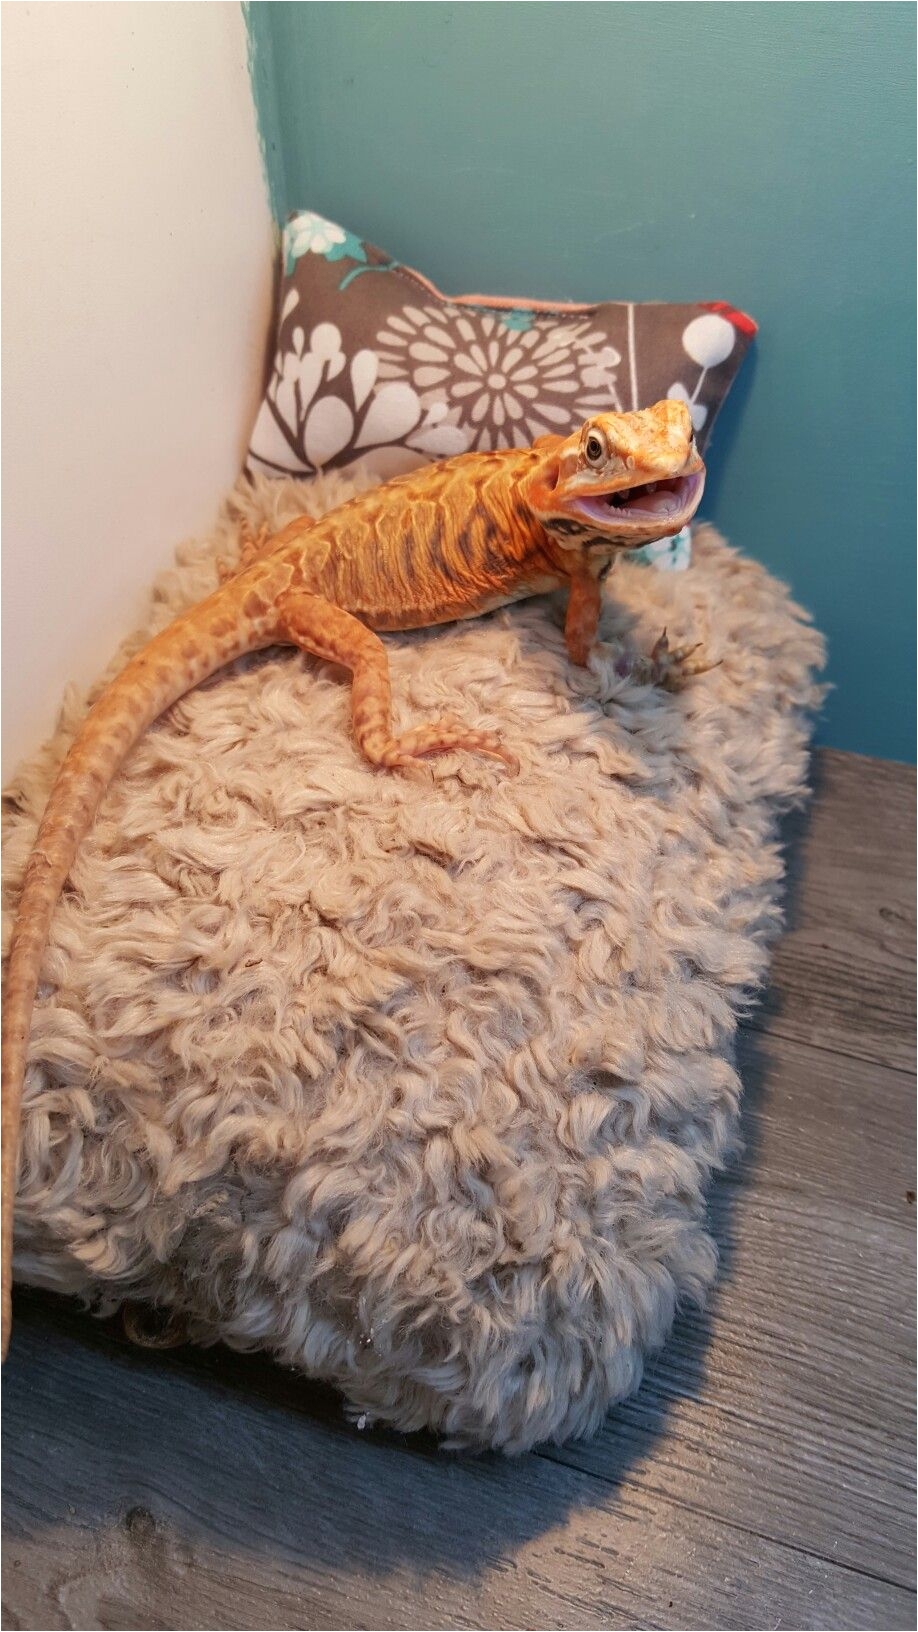 www ksmsdragonlandings com custom made bearded dragon hammocks pillow beds and wooden beds with accessories